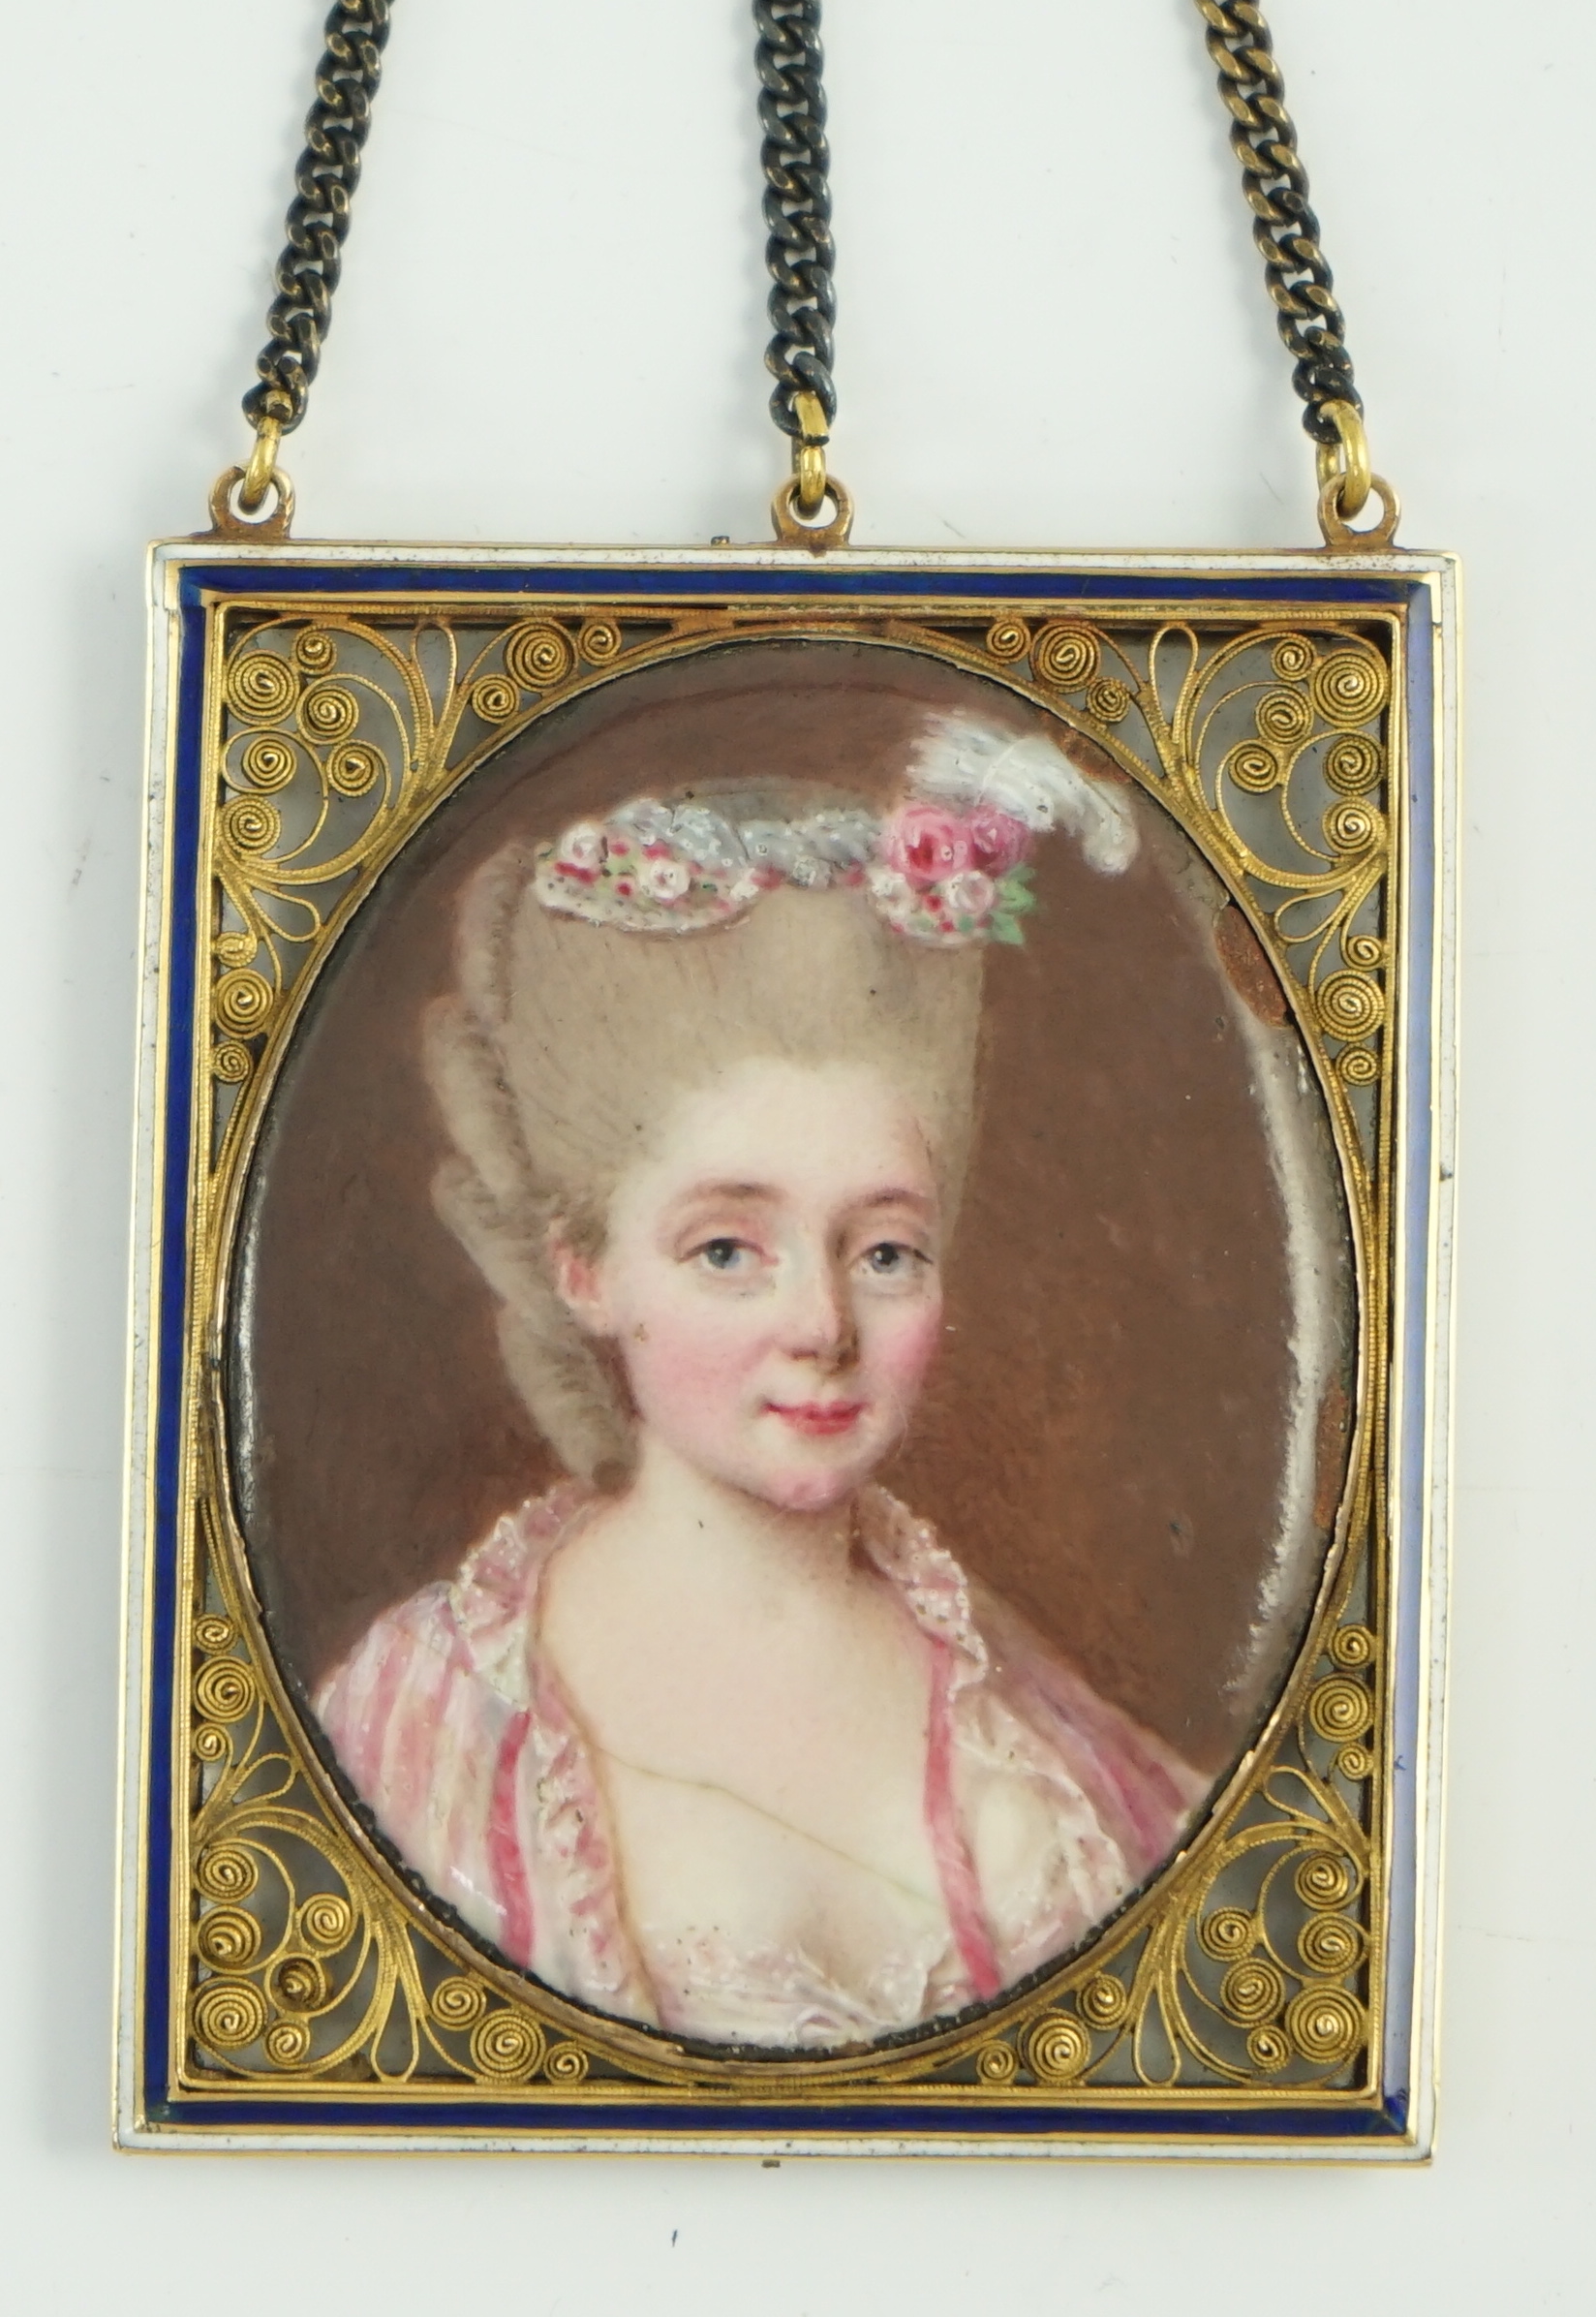 French School circa 1780, Portrait miniature of a lady with flowers in her coiffure, enamel on copper, 4 x 3.2cm.